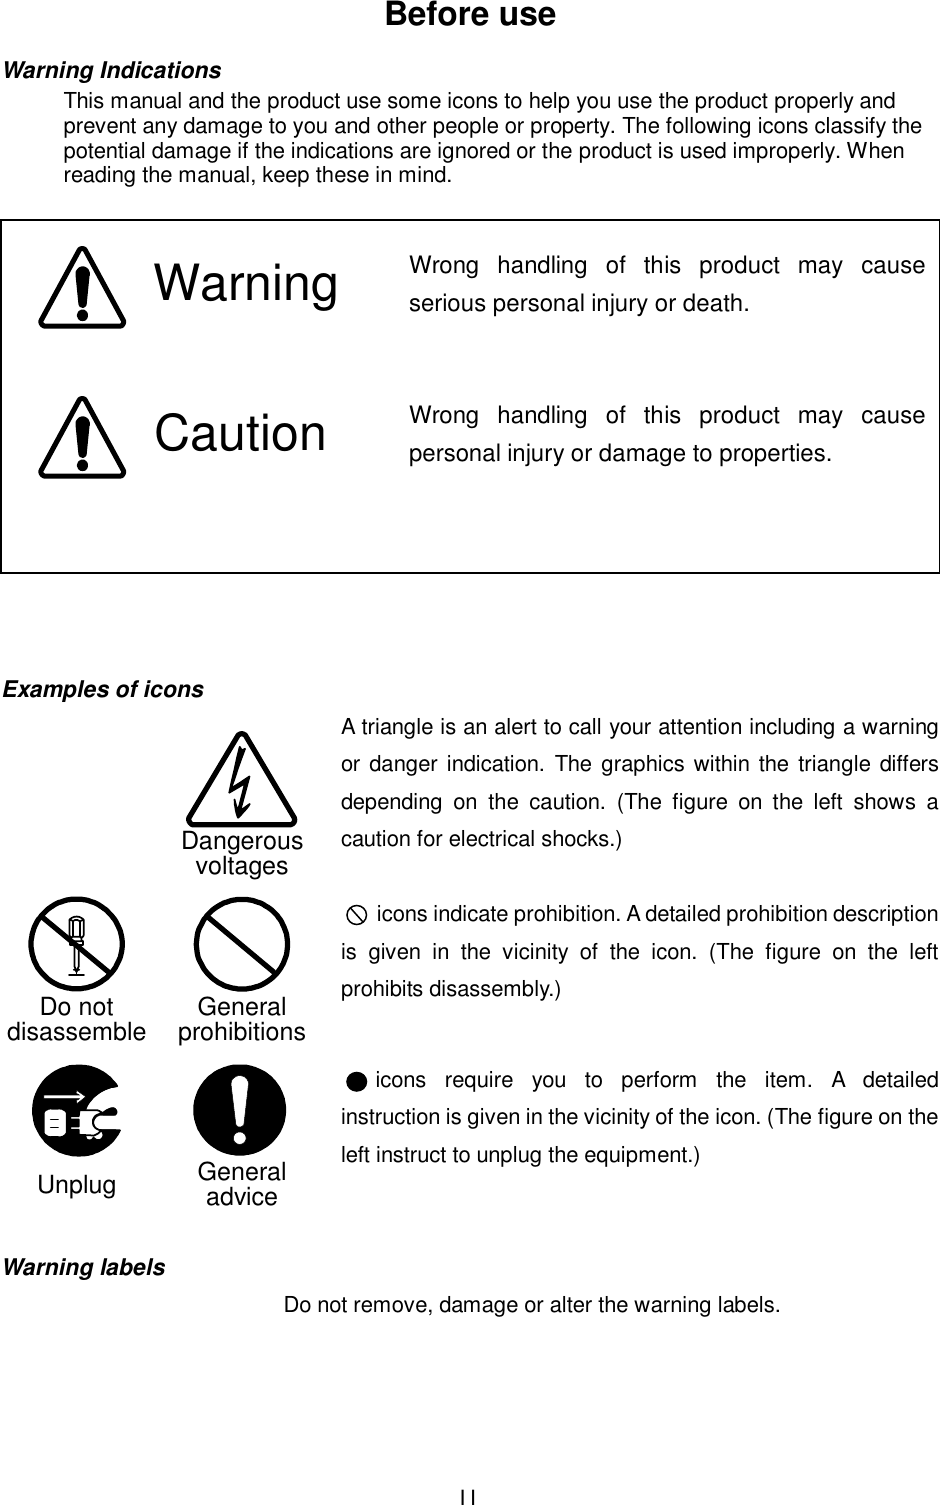  II Before use Warning Indications This manual and the product use some icons to help you use the product properly and prevent any damage to you and other people or property. The following icons classify the potential damage if the indications are ignored or the product is used improperly. When reading the manual, keep these in mind.     Examples of icons A triangle is an alert to call your attention including a warning or danger indication.  The graphics within the triangle differs depending  on  the  caution.  (The  figure  on  the  left  shows  a caution for electrical shocks.)      icons indicate prohibition. A detailed prohibition description is  given  in  the  vicinity  of  the  icon.  (The  figure  on  the  left prohibits disassembly.)        icons  require  you  to  perform  the  item.  A  detailed instruction is given in the vicinity of the icon. (The figure on the left instruct to unplug the equipment.)   Warning labels Do not remove, damage or alter the warning labels.    Warning      Caution  Wrong  handling  of  this  product  may  causeserious personal injury or death.   Wrong  handling  of  this  product  may  causepersonal injury or damage to properties.  DangerousvoltagesGeneralprohibitionsGeneraladviceDo notdisassembleUnplug